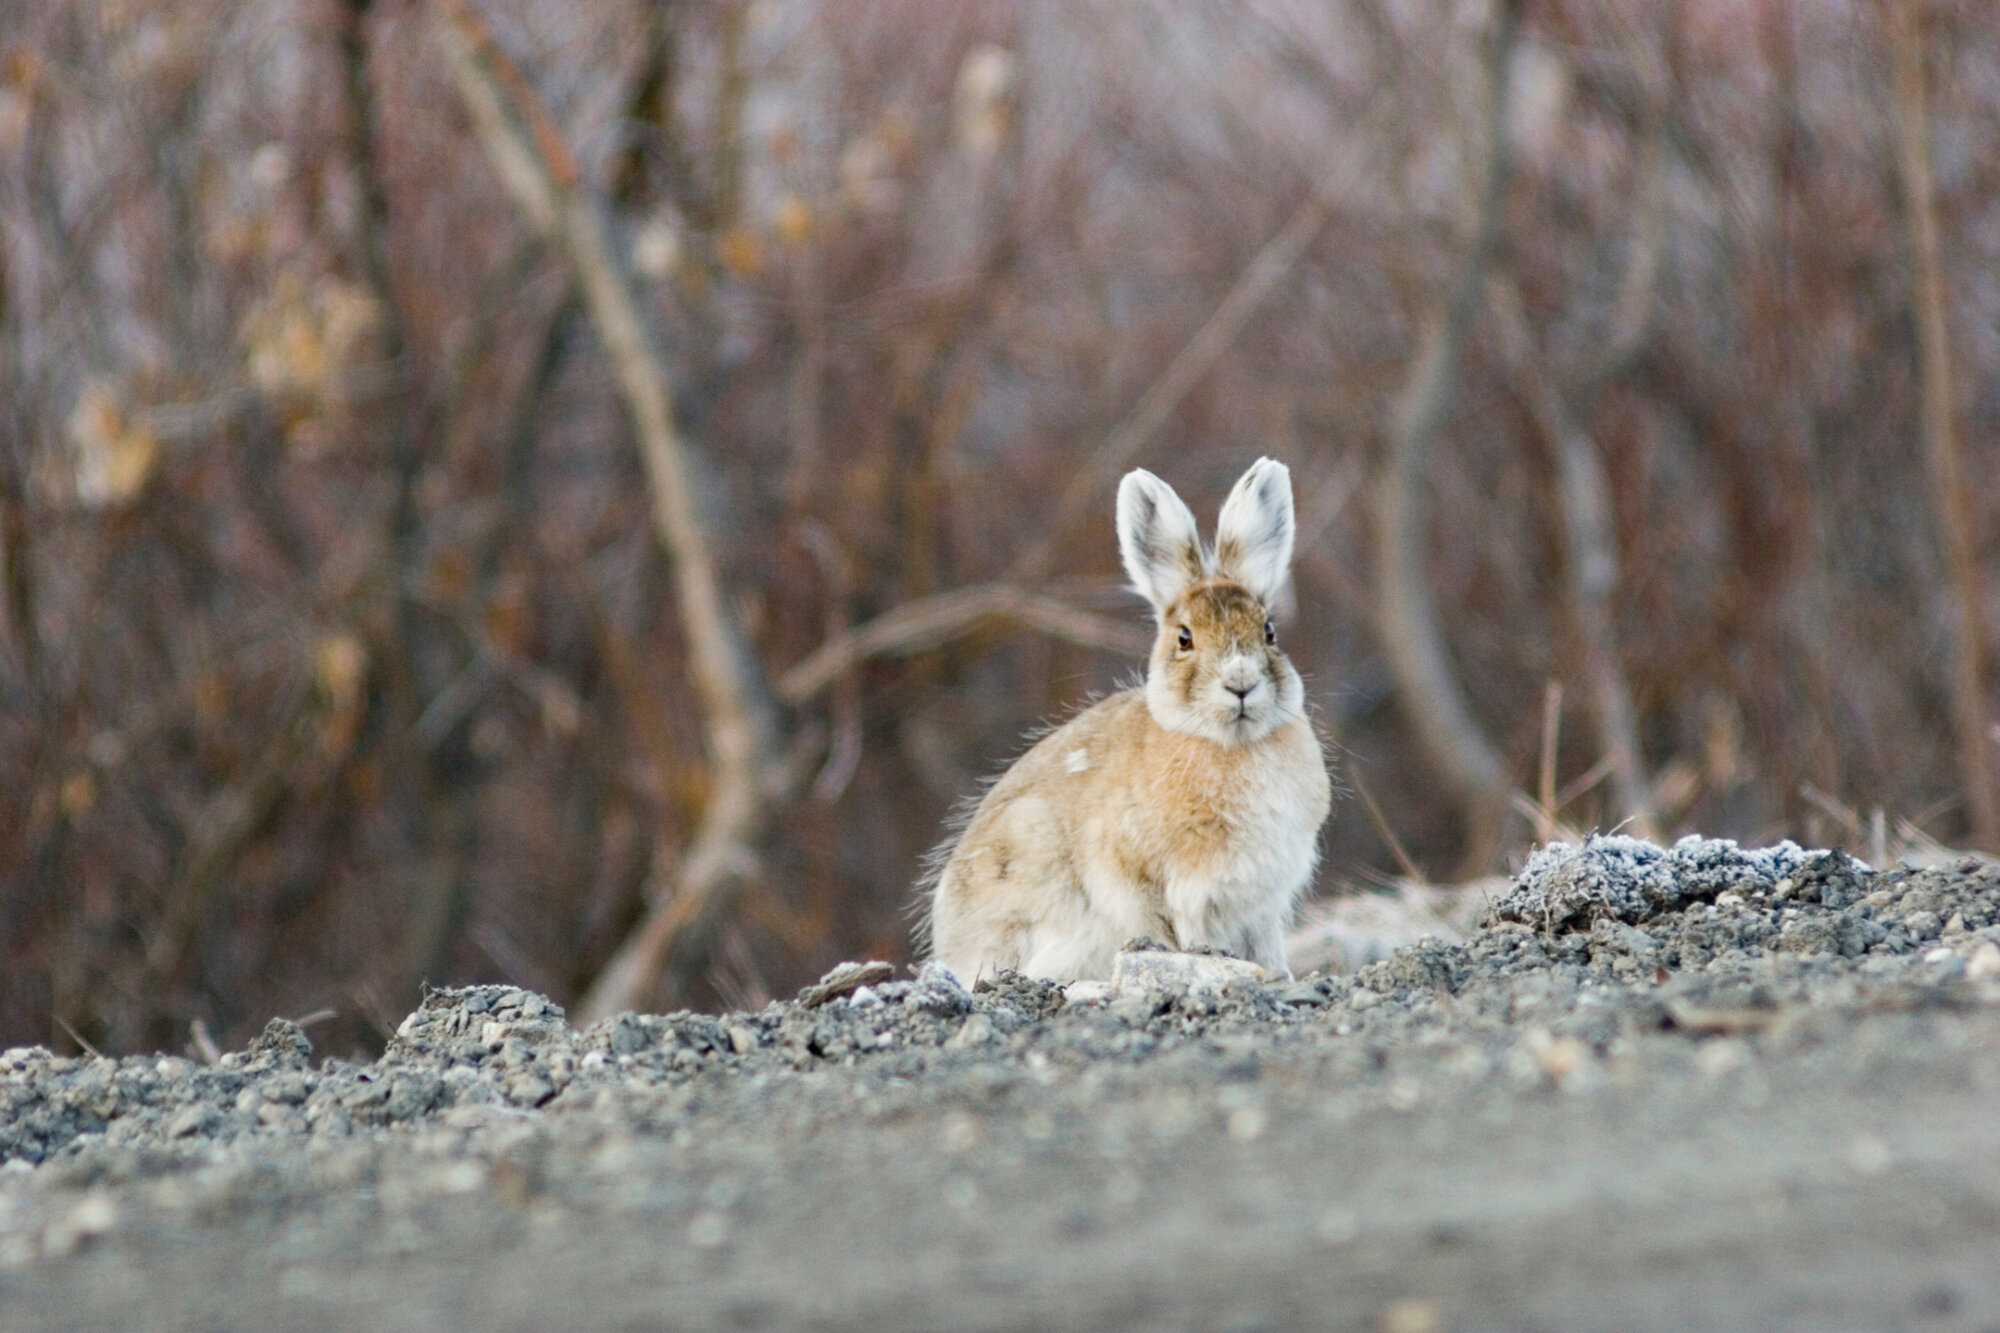 a snowshoe hare sitting on the ground